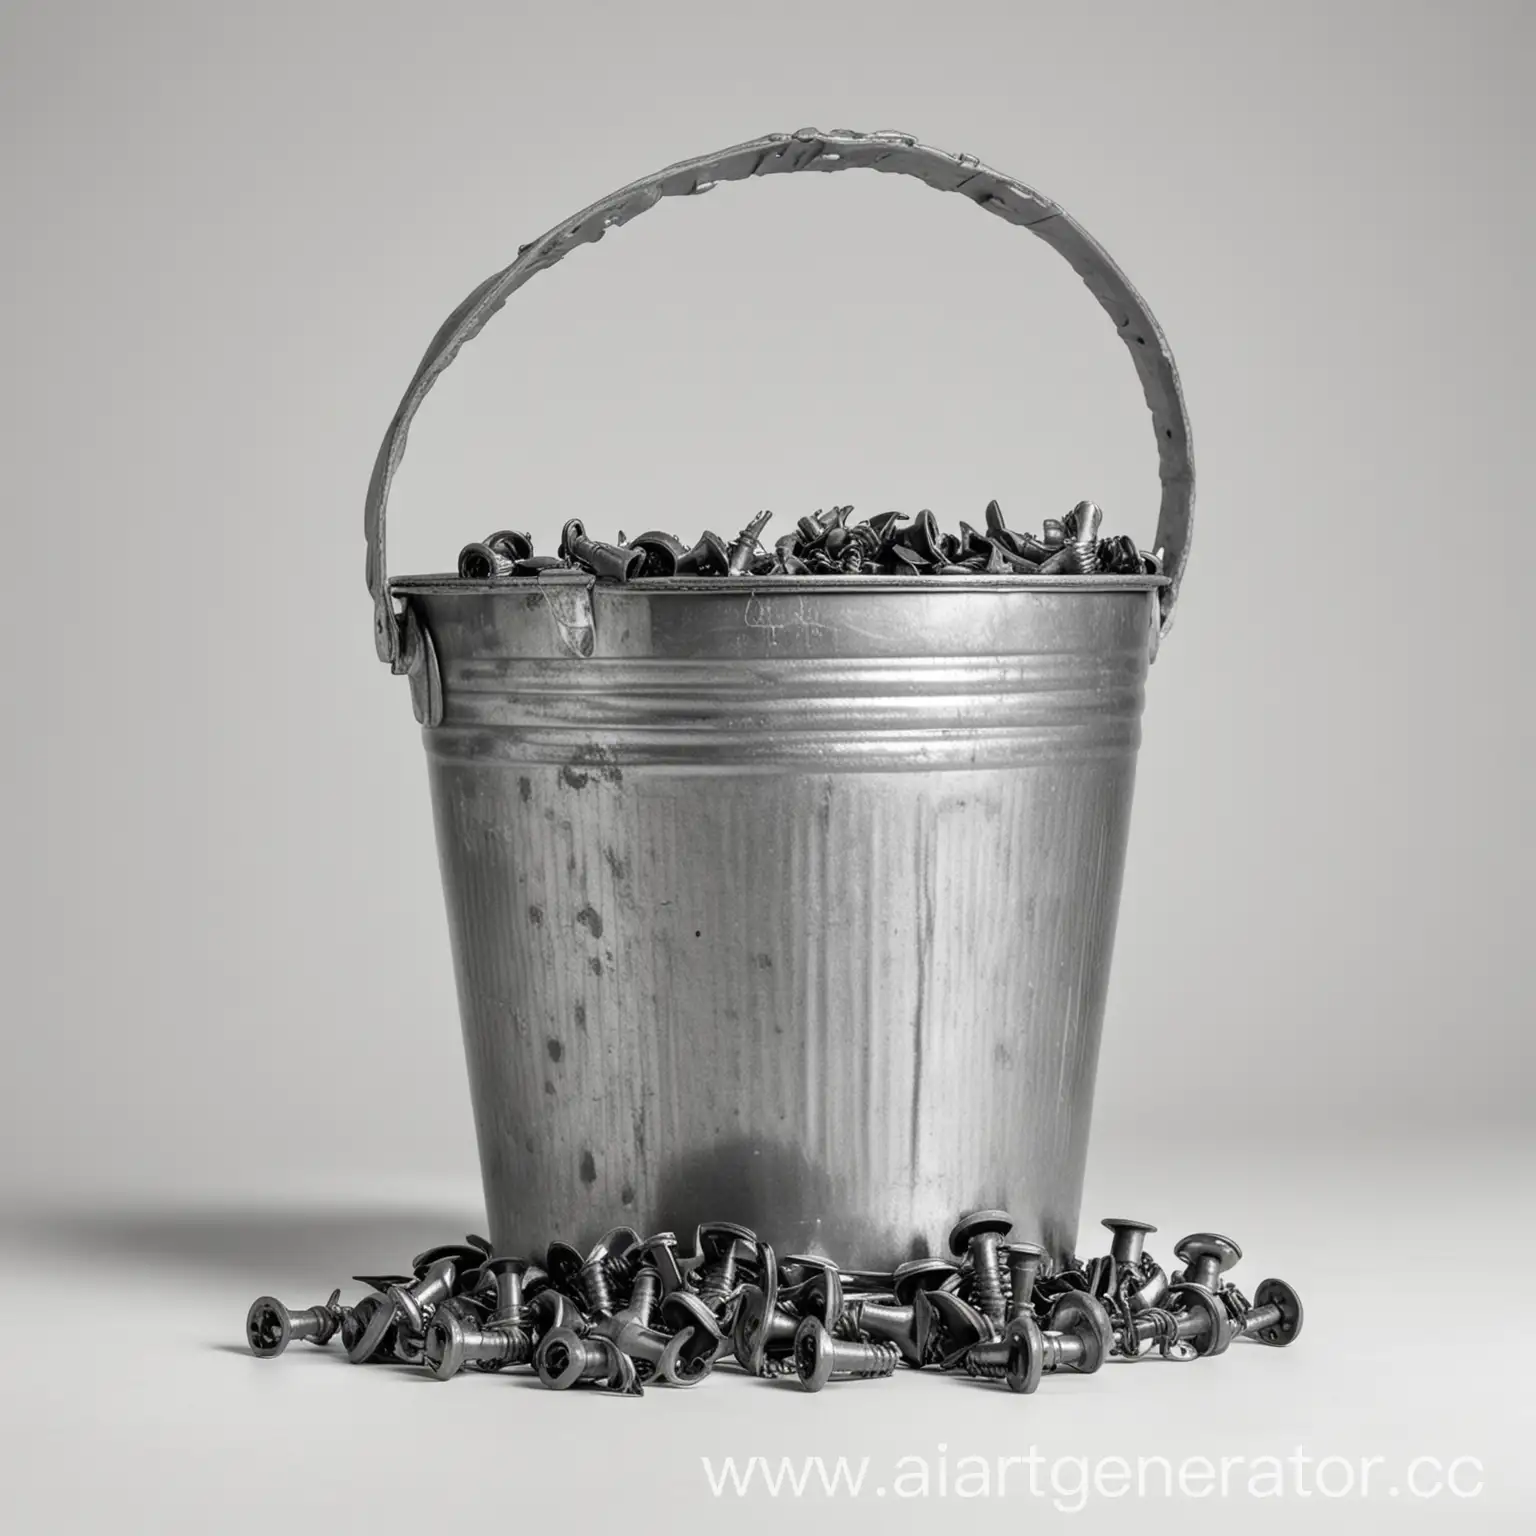 Bucket-of-Screws-on-White-Background-Construction-Tools-and-Hardware